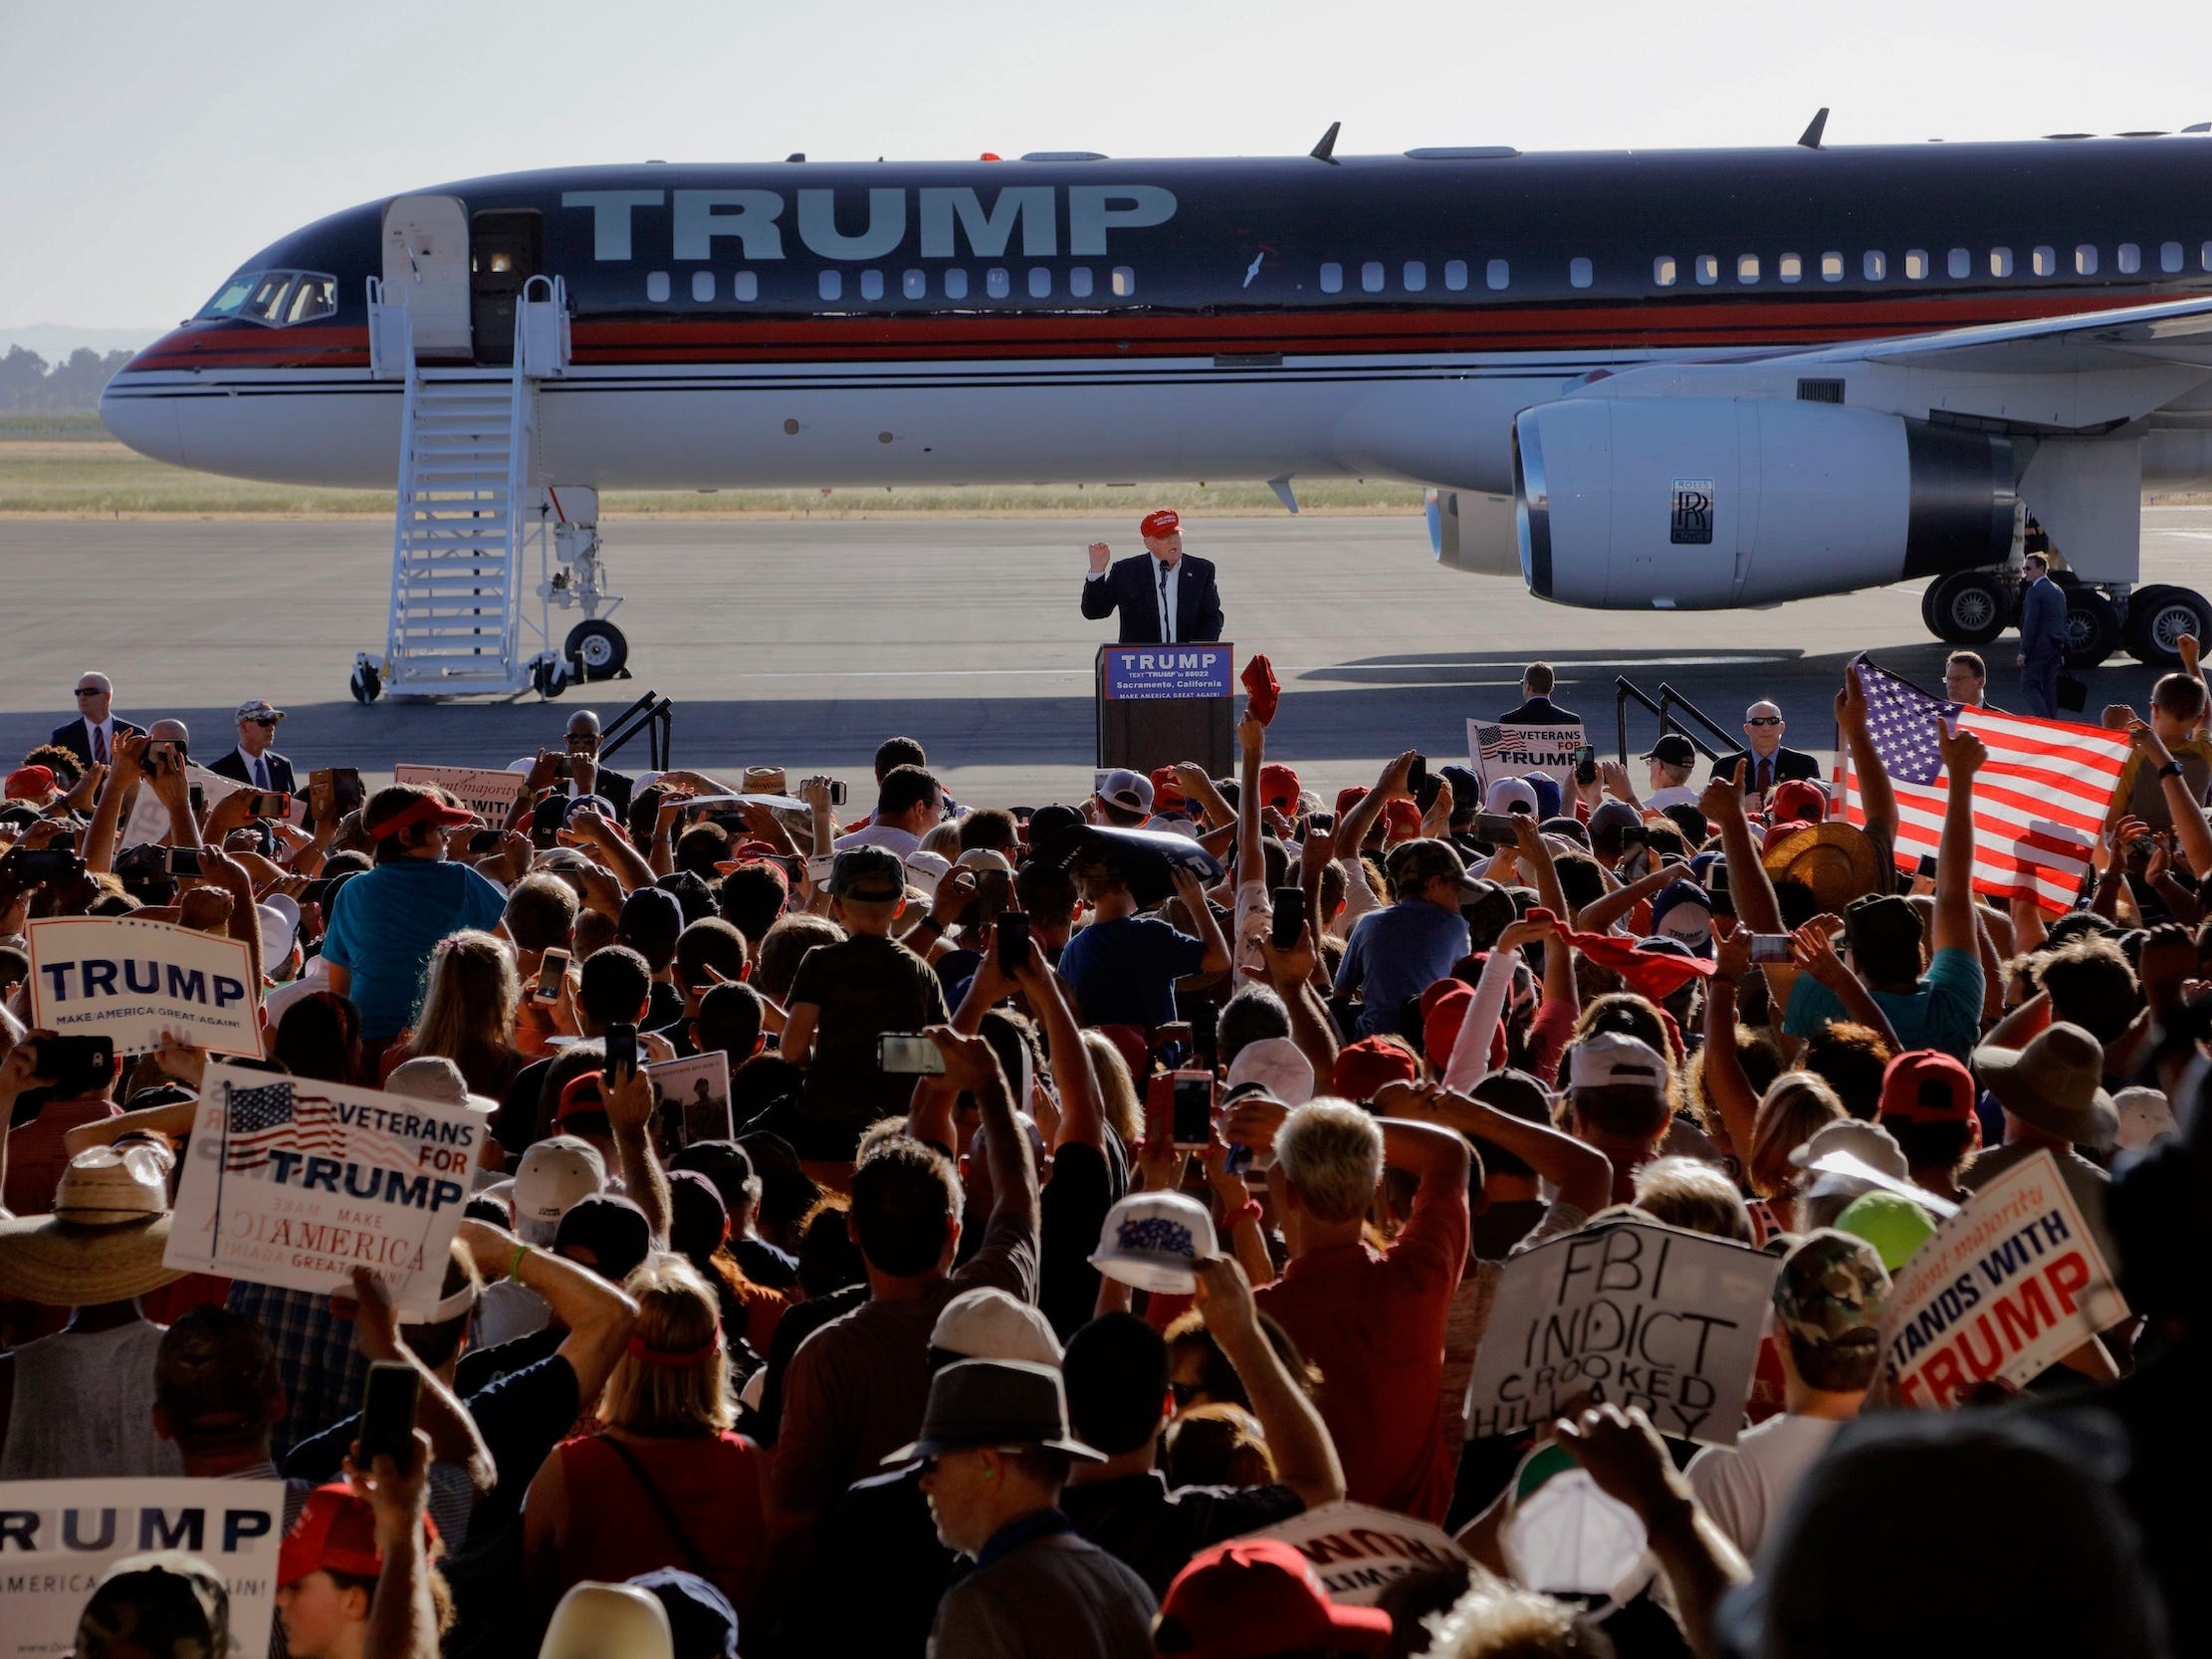 Trump at a rally with the 757 in the back.